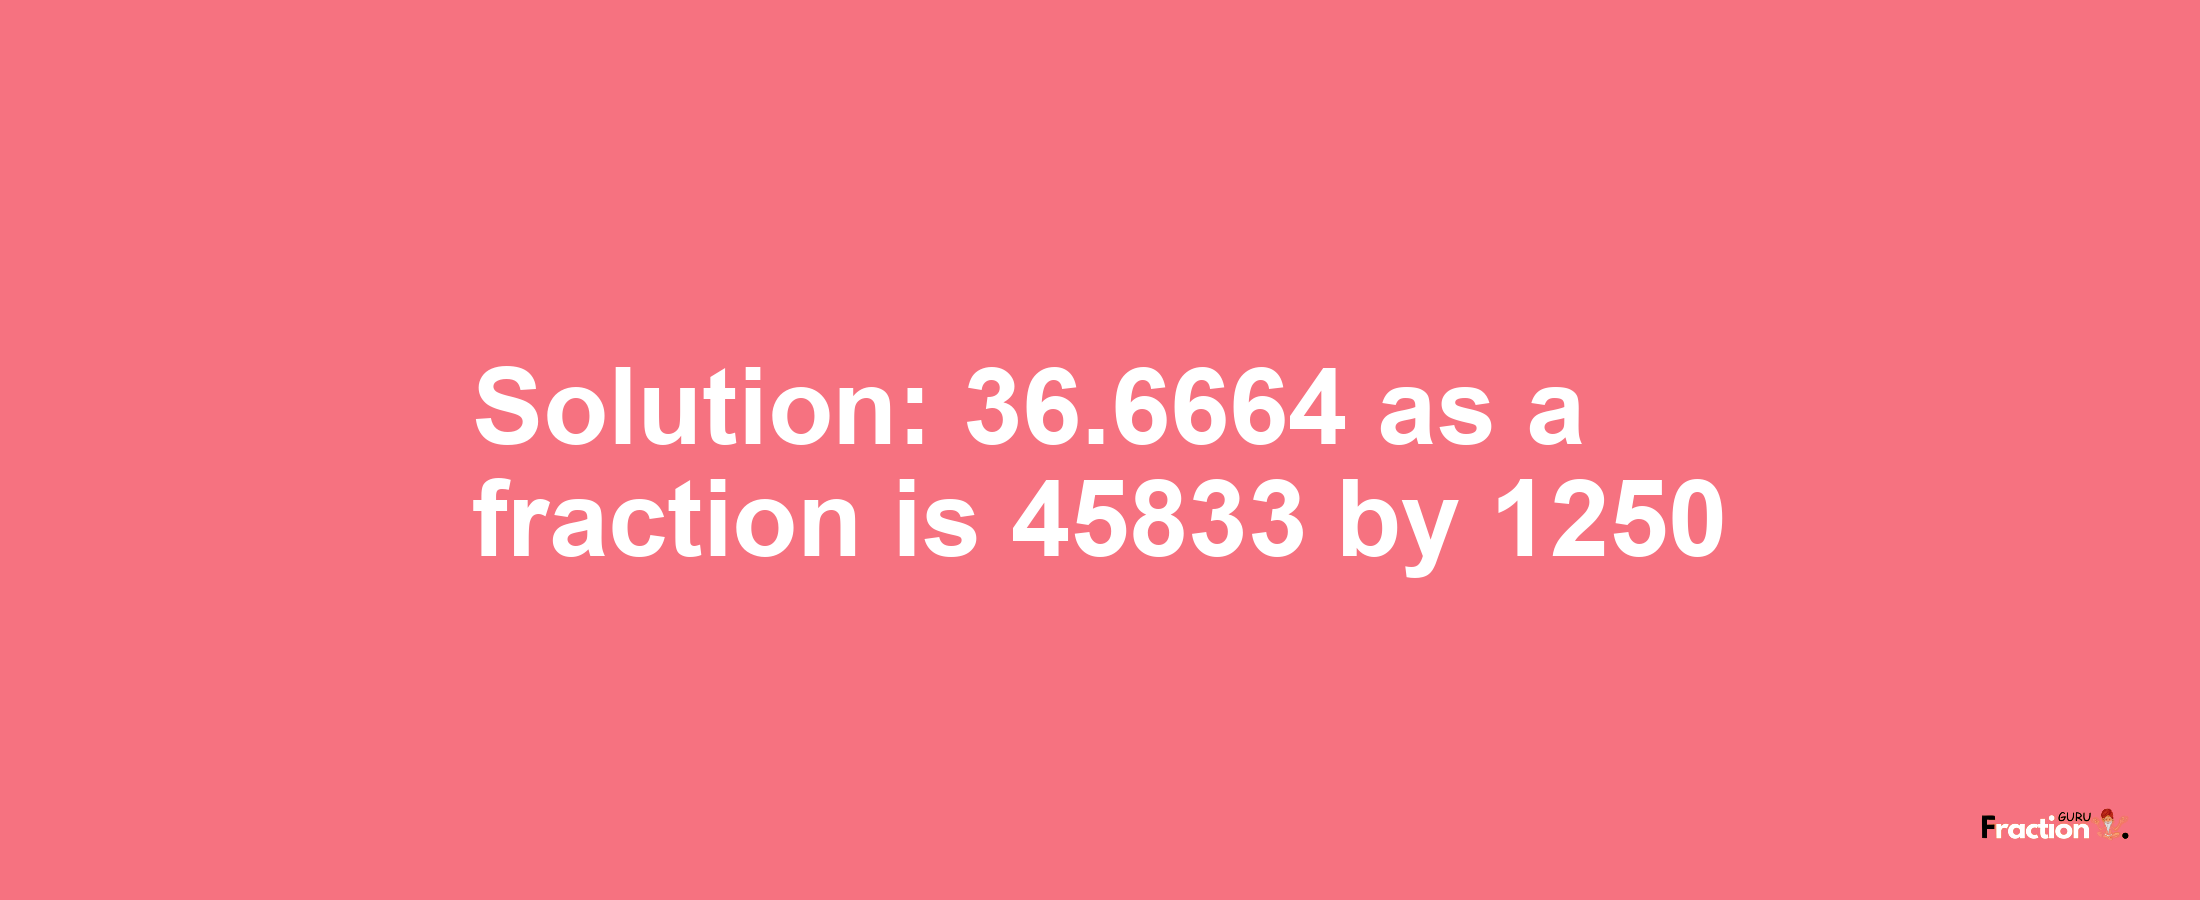 Solution:36.6664 as a fraction is 45833/1250